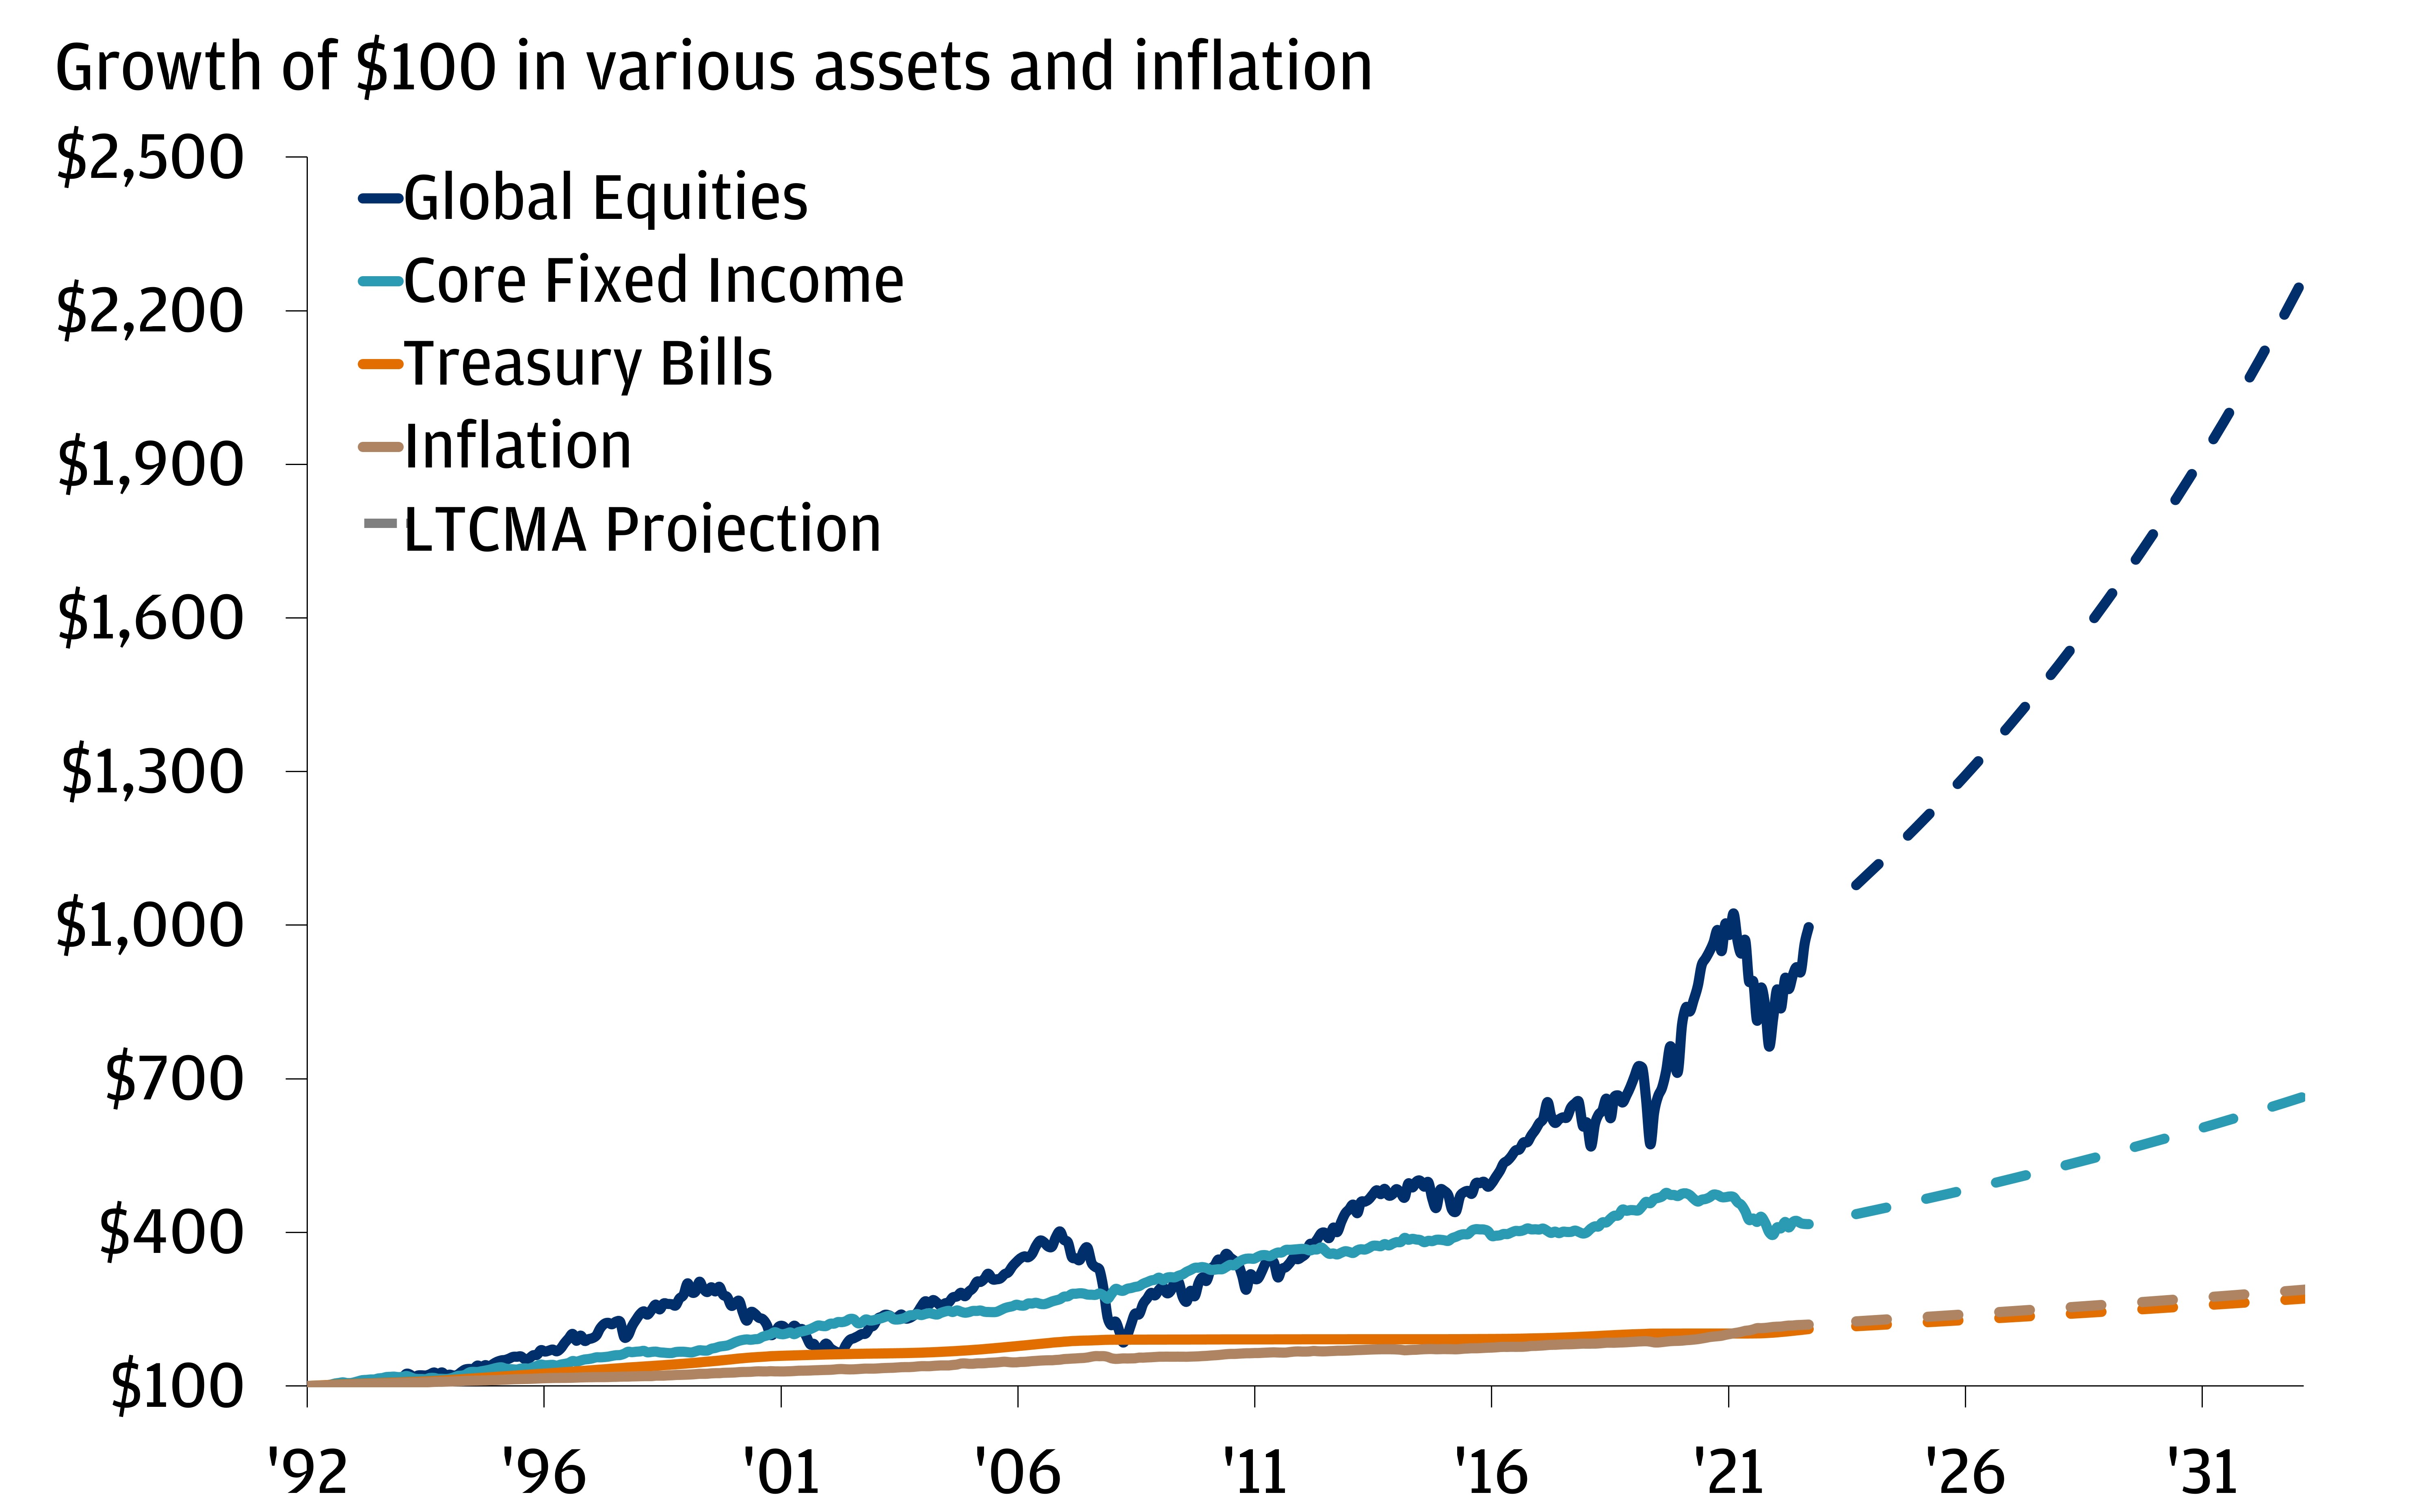 This chart shows that equities and fixed income have outperformed cash and inflation.